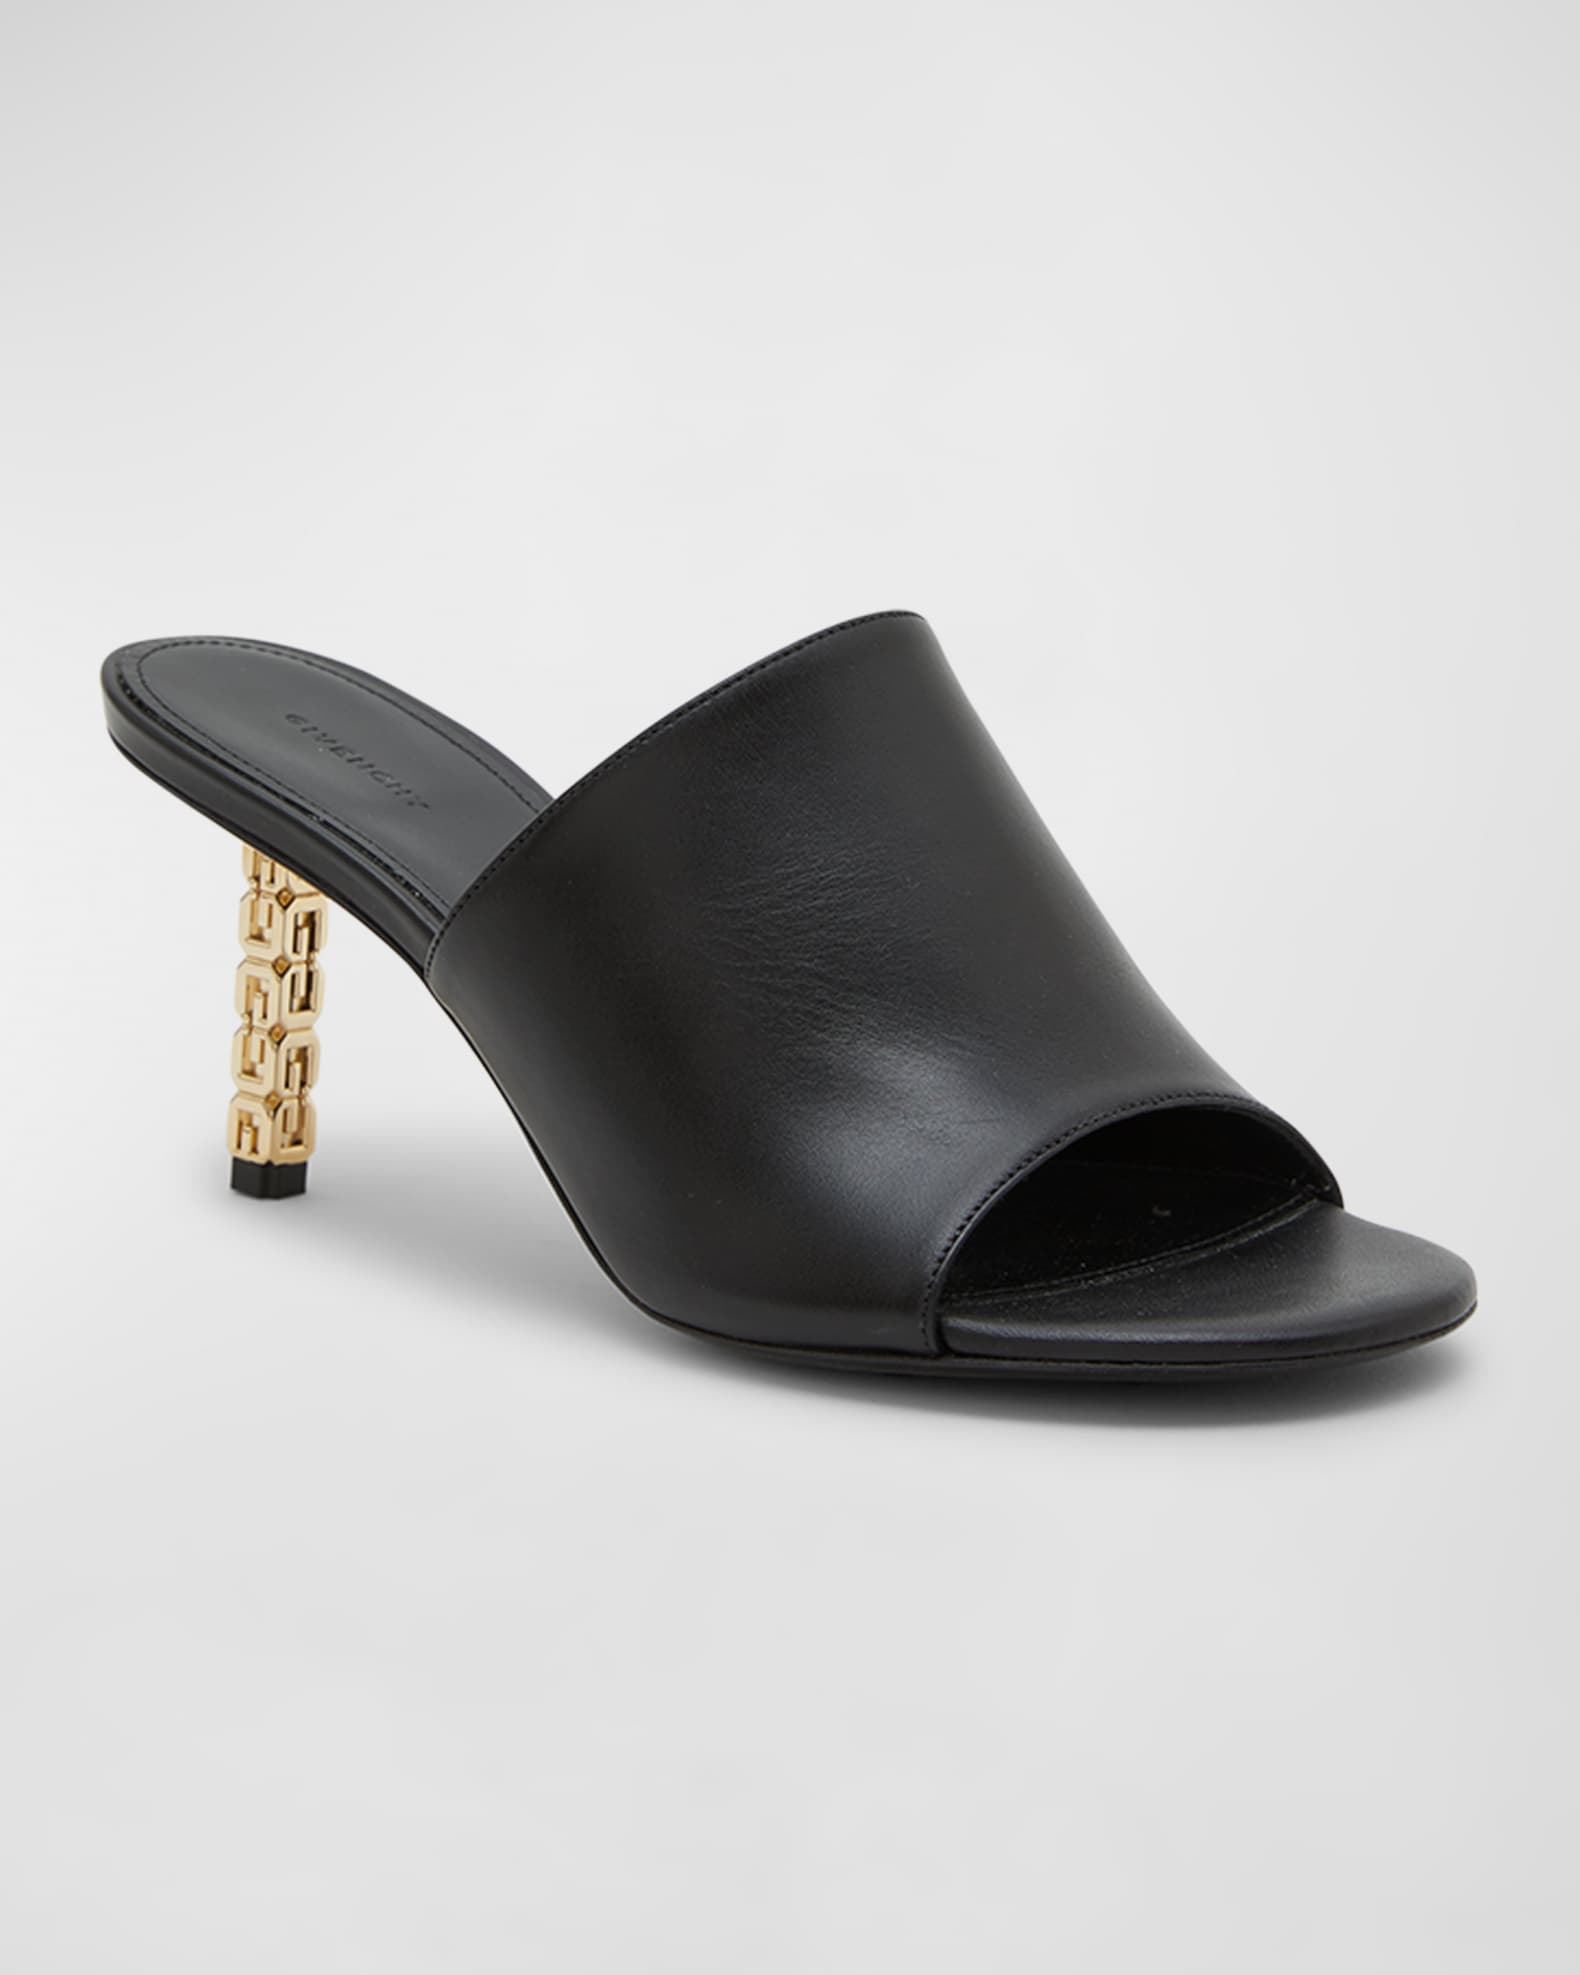 Givenchy G Cube Leather Mule Sandals | Neiman Marcus